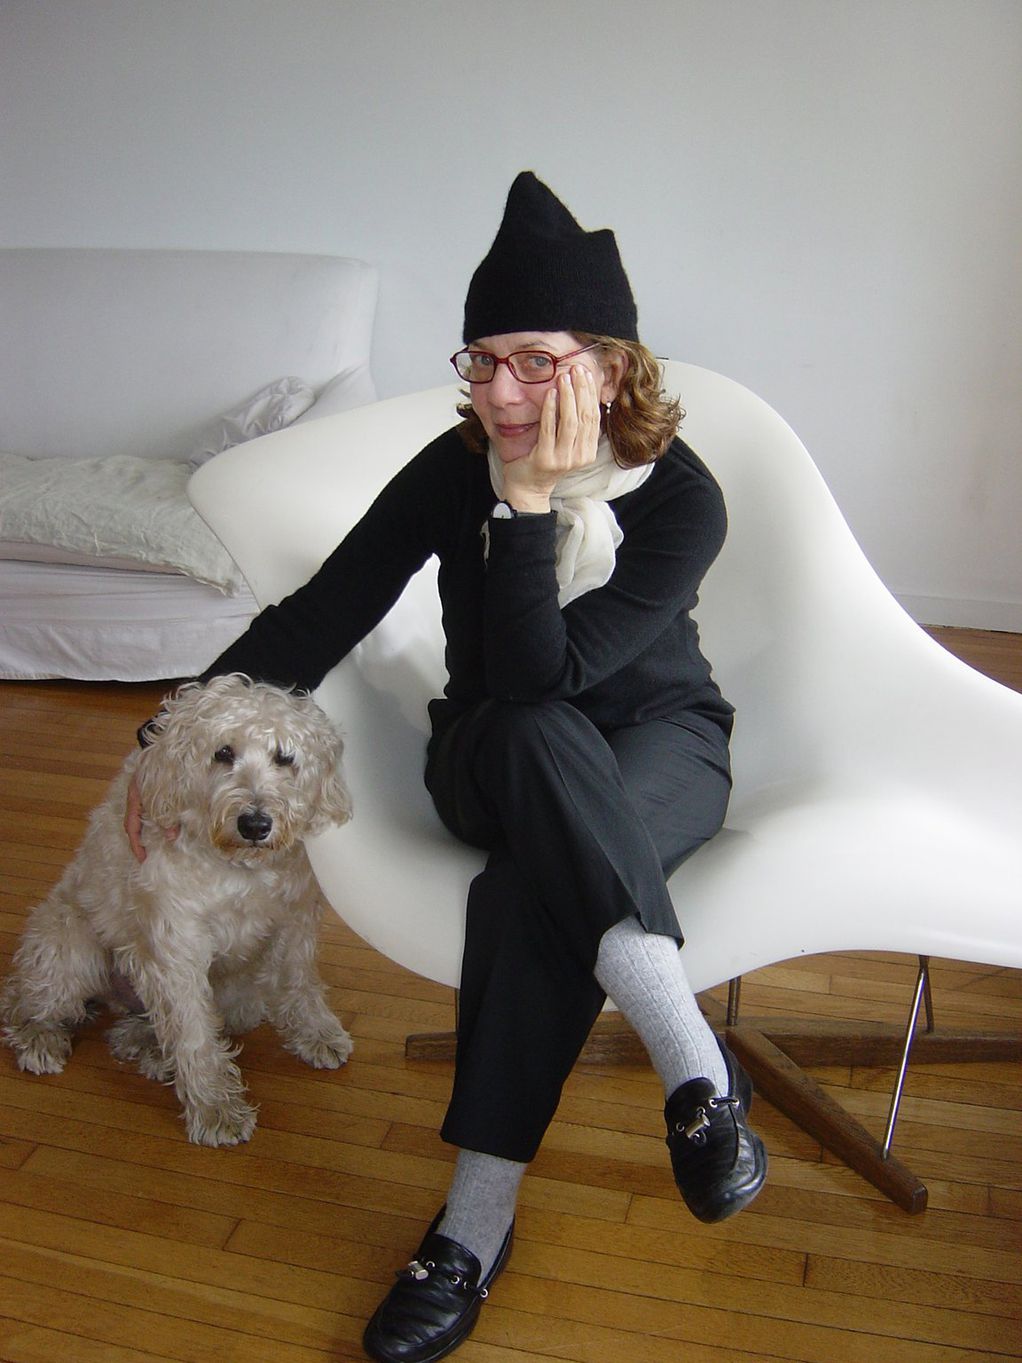 Maira Kalman and her dog, Pete. Contributed by Rick Meyerowitz